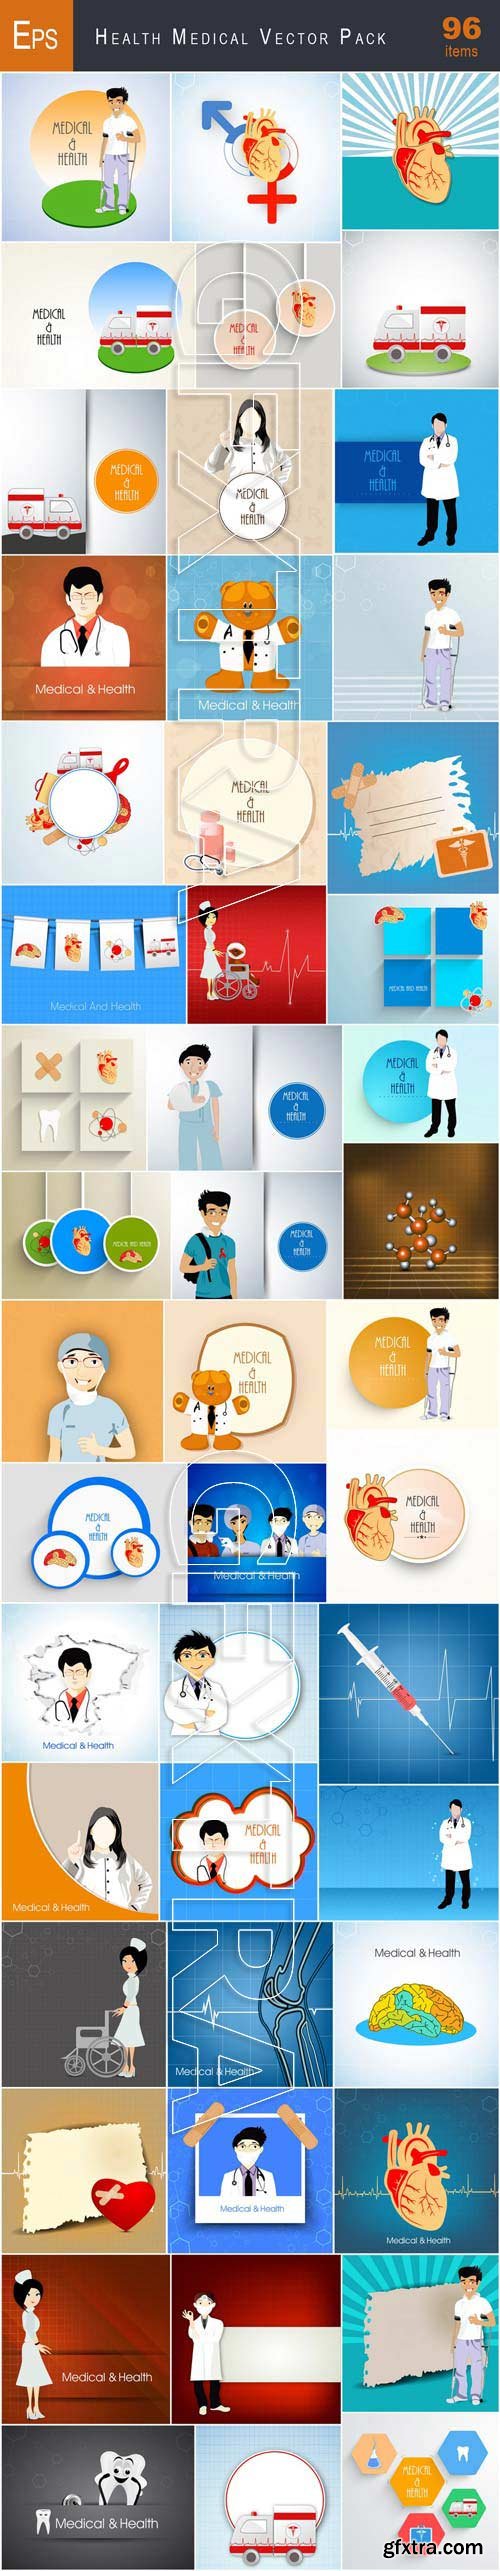 VectorCity Health Medical Vector Pack